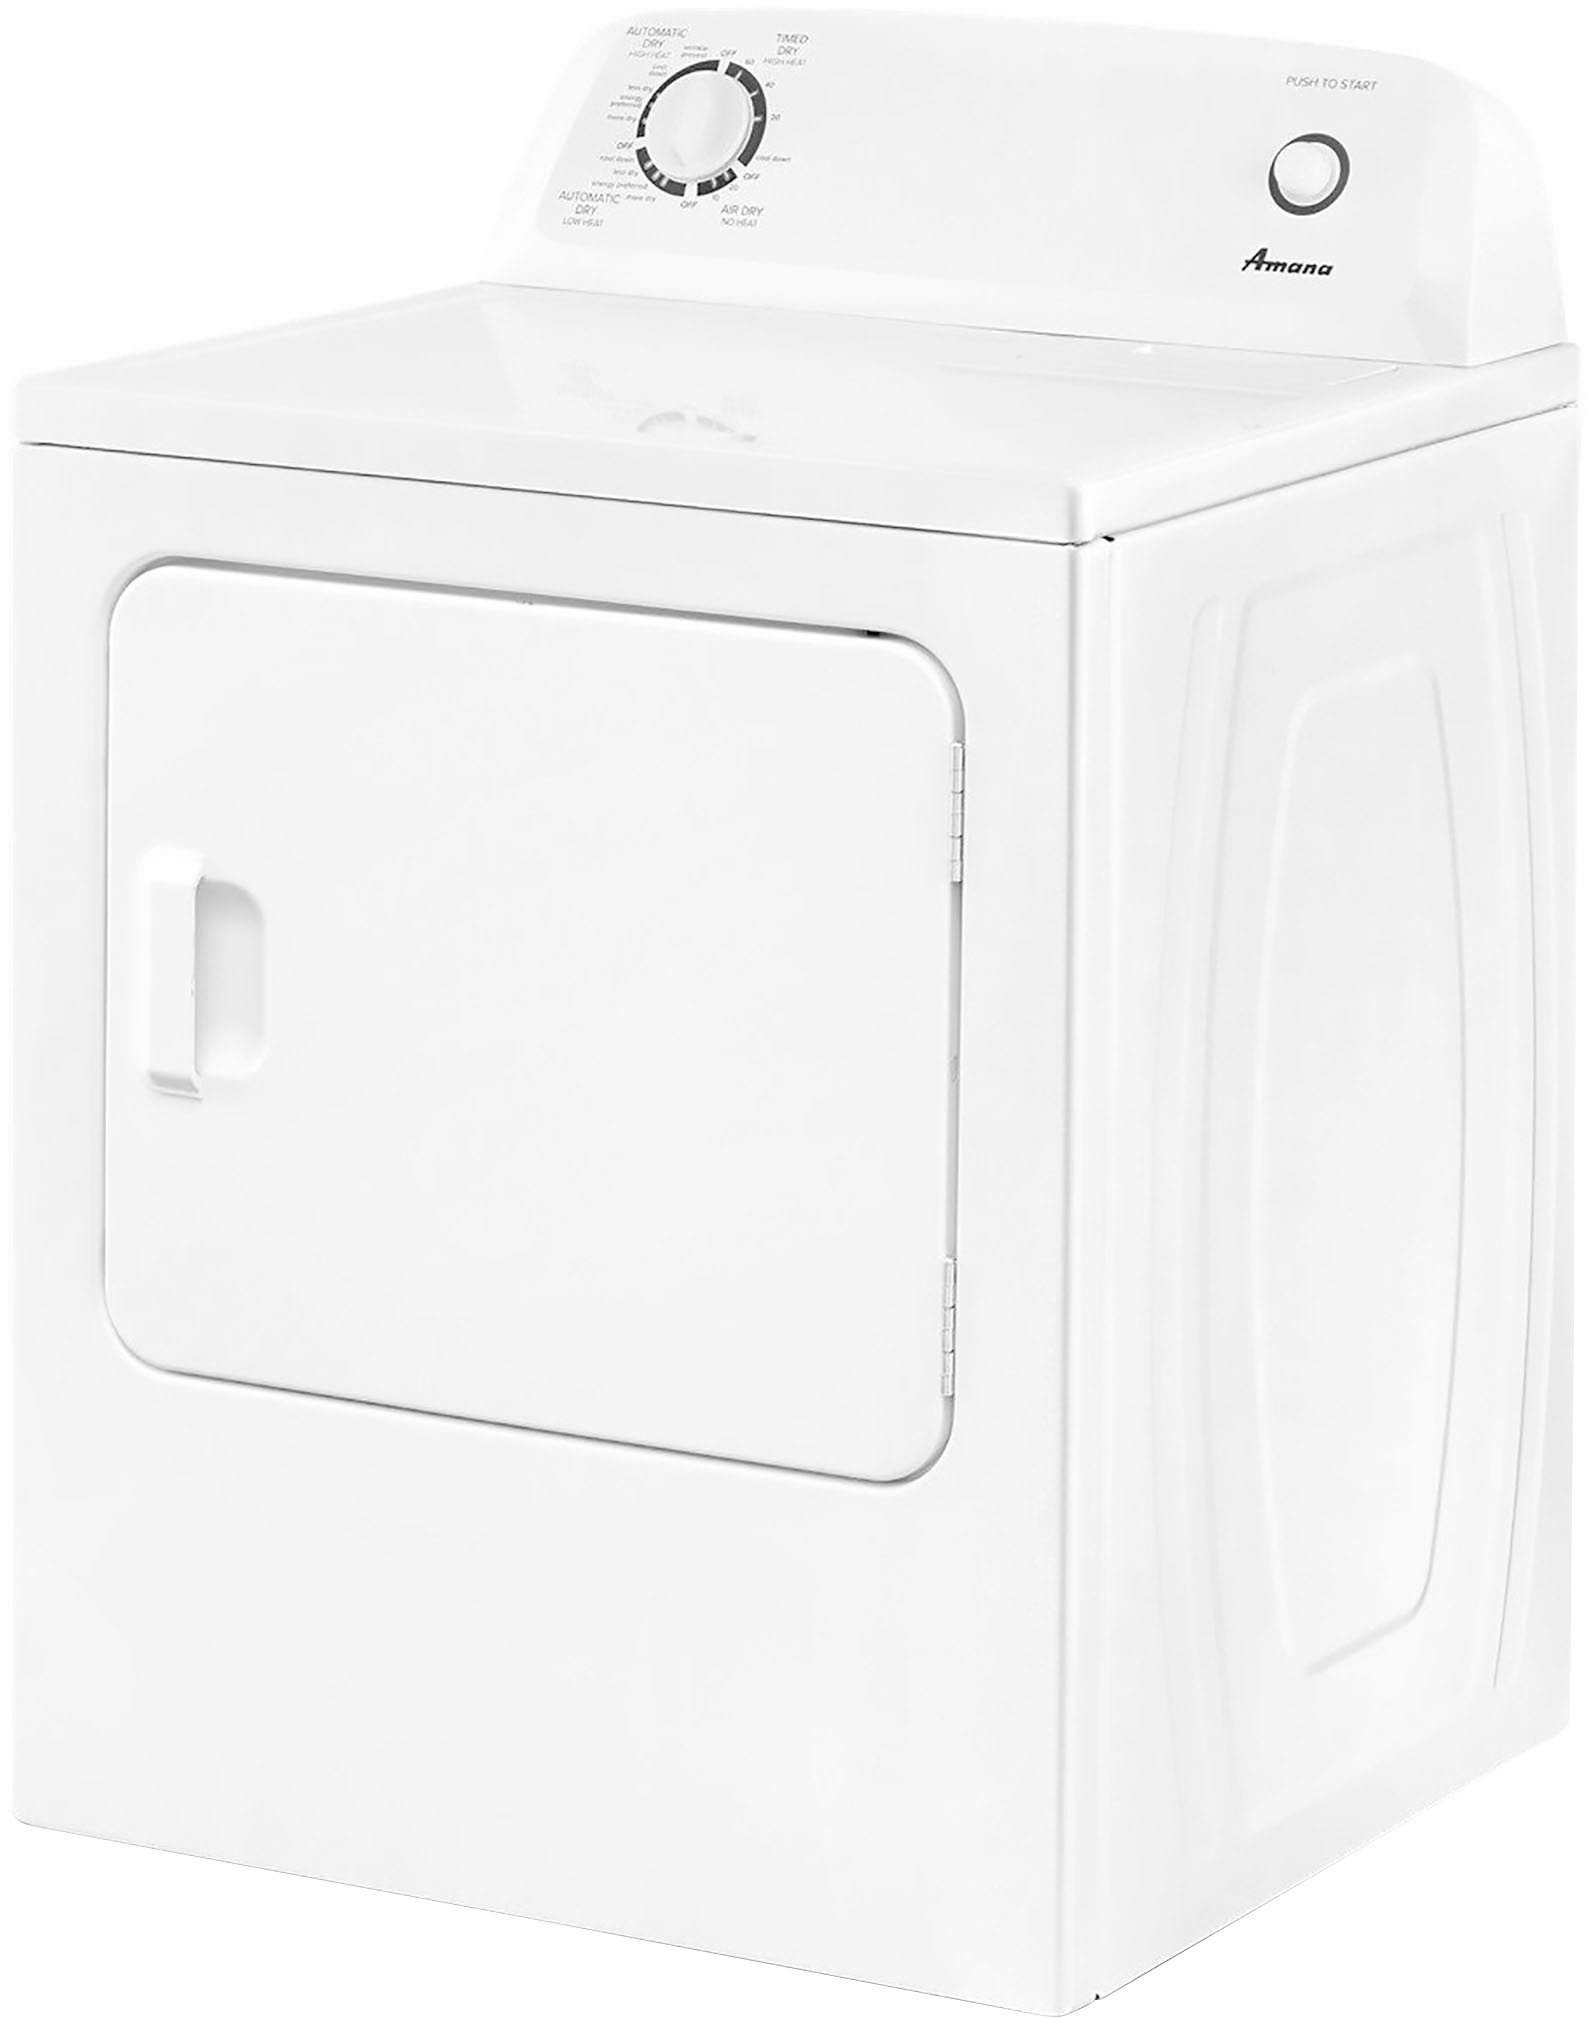 Amana 6.5 Cu. Ft. Gas Dryer with Automatic Dryness Control White ...